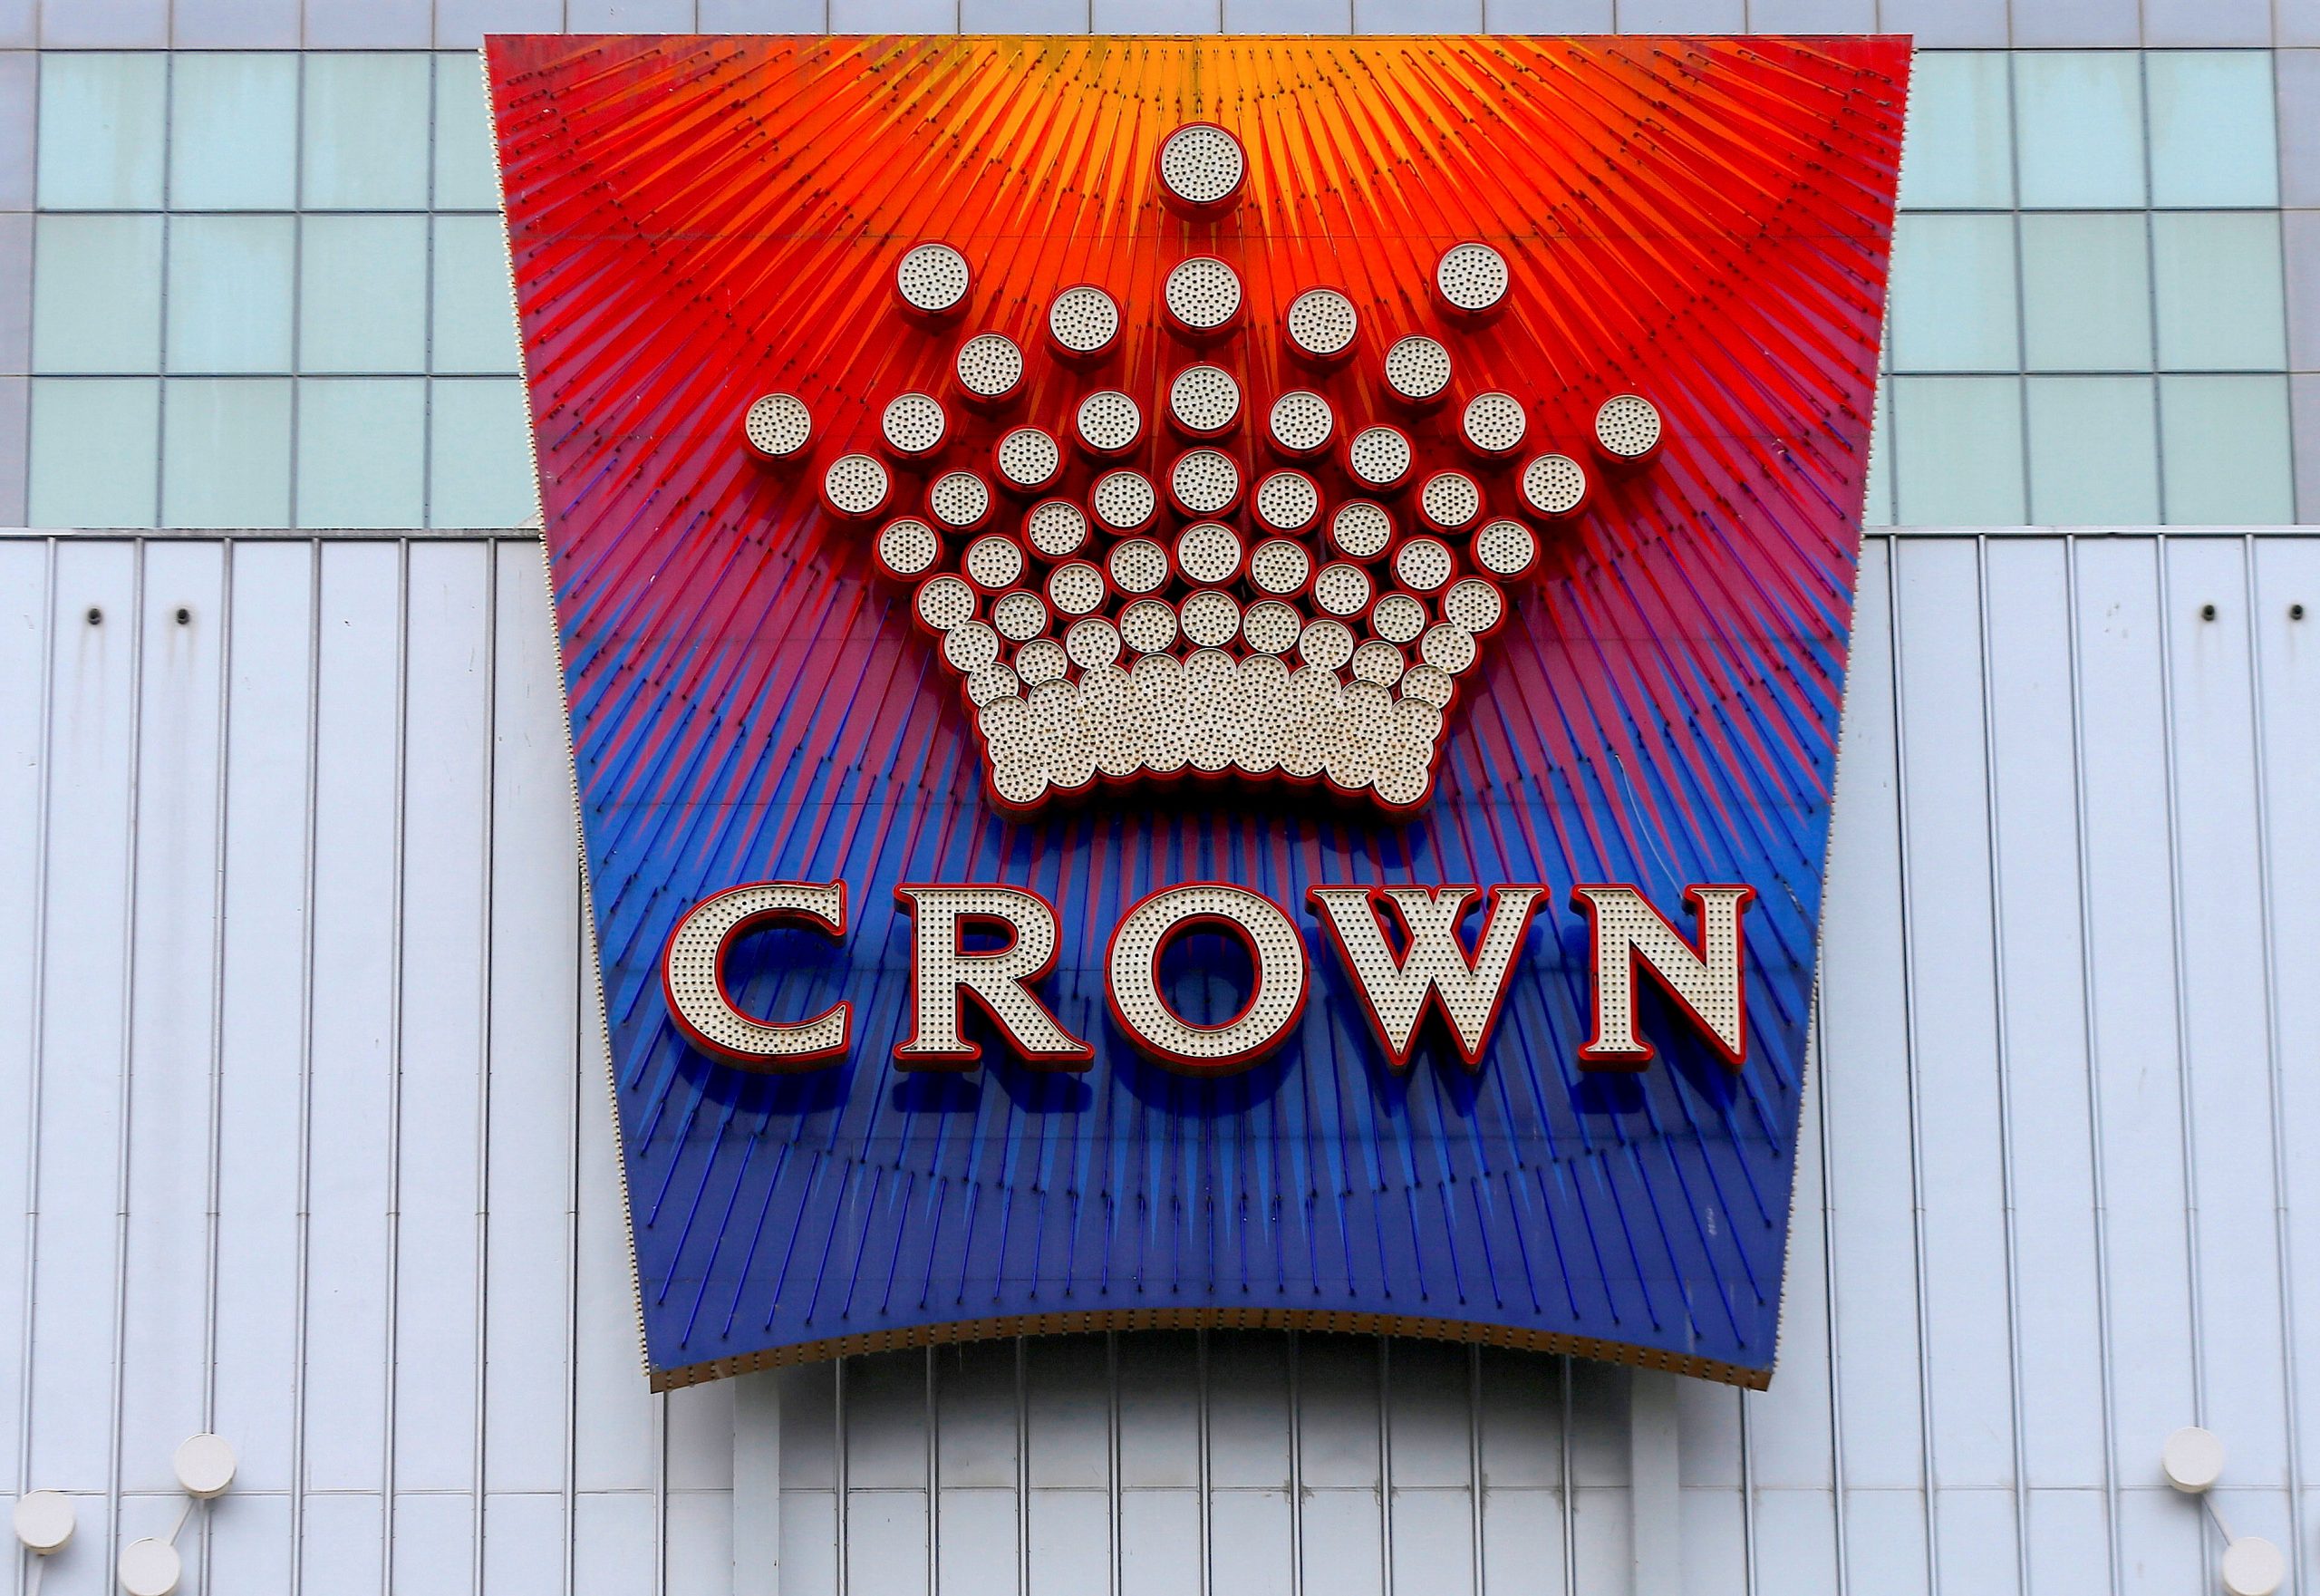  Australia’s Star eyes Crown in $7 bln play, vies with private equity